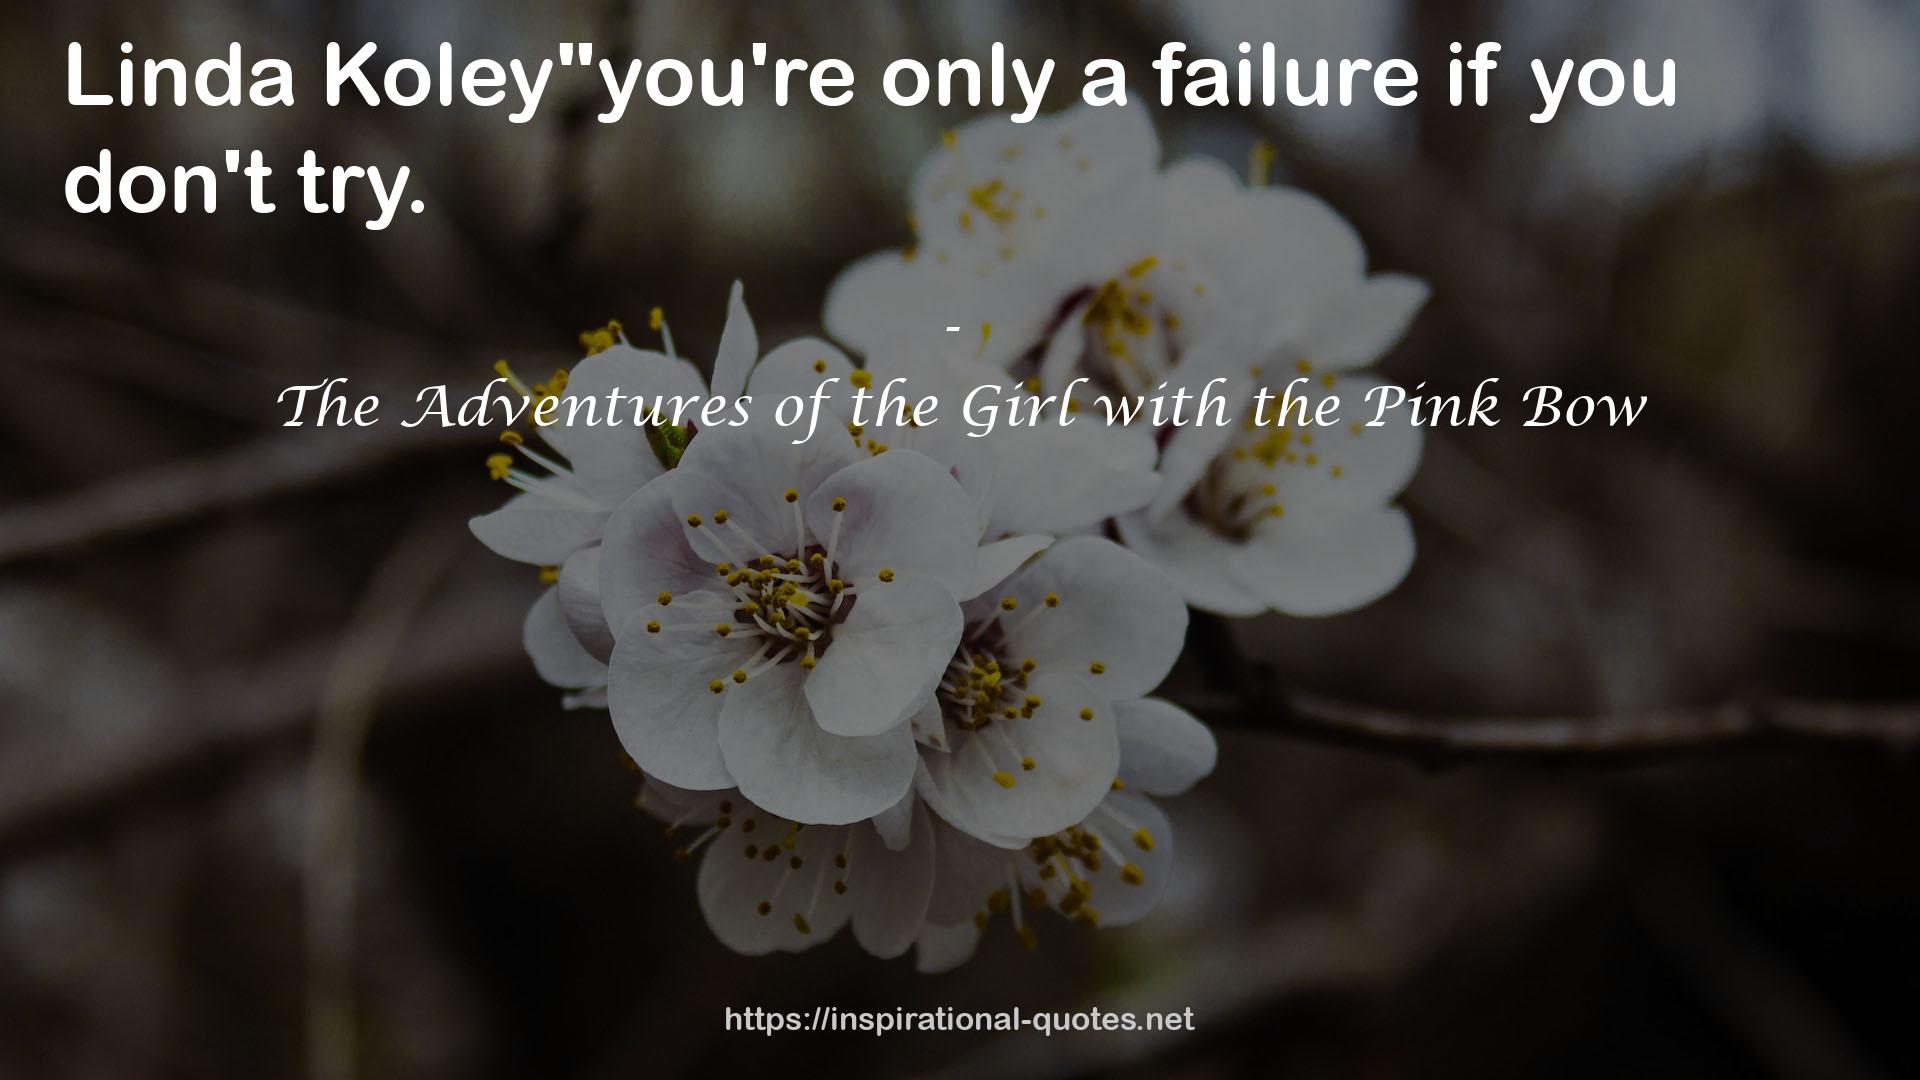 The Adventures of the Girl with the Pink Bow QUOTES